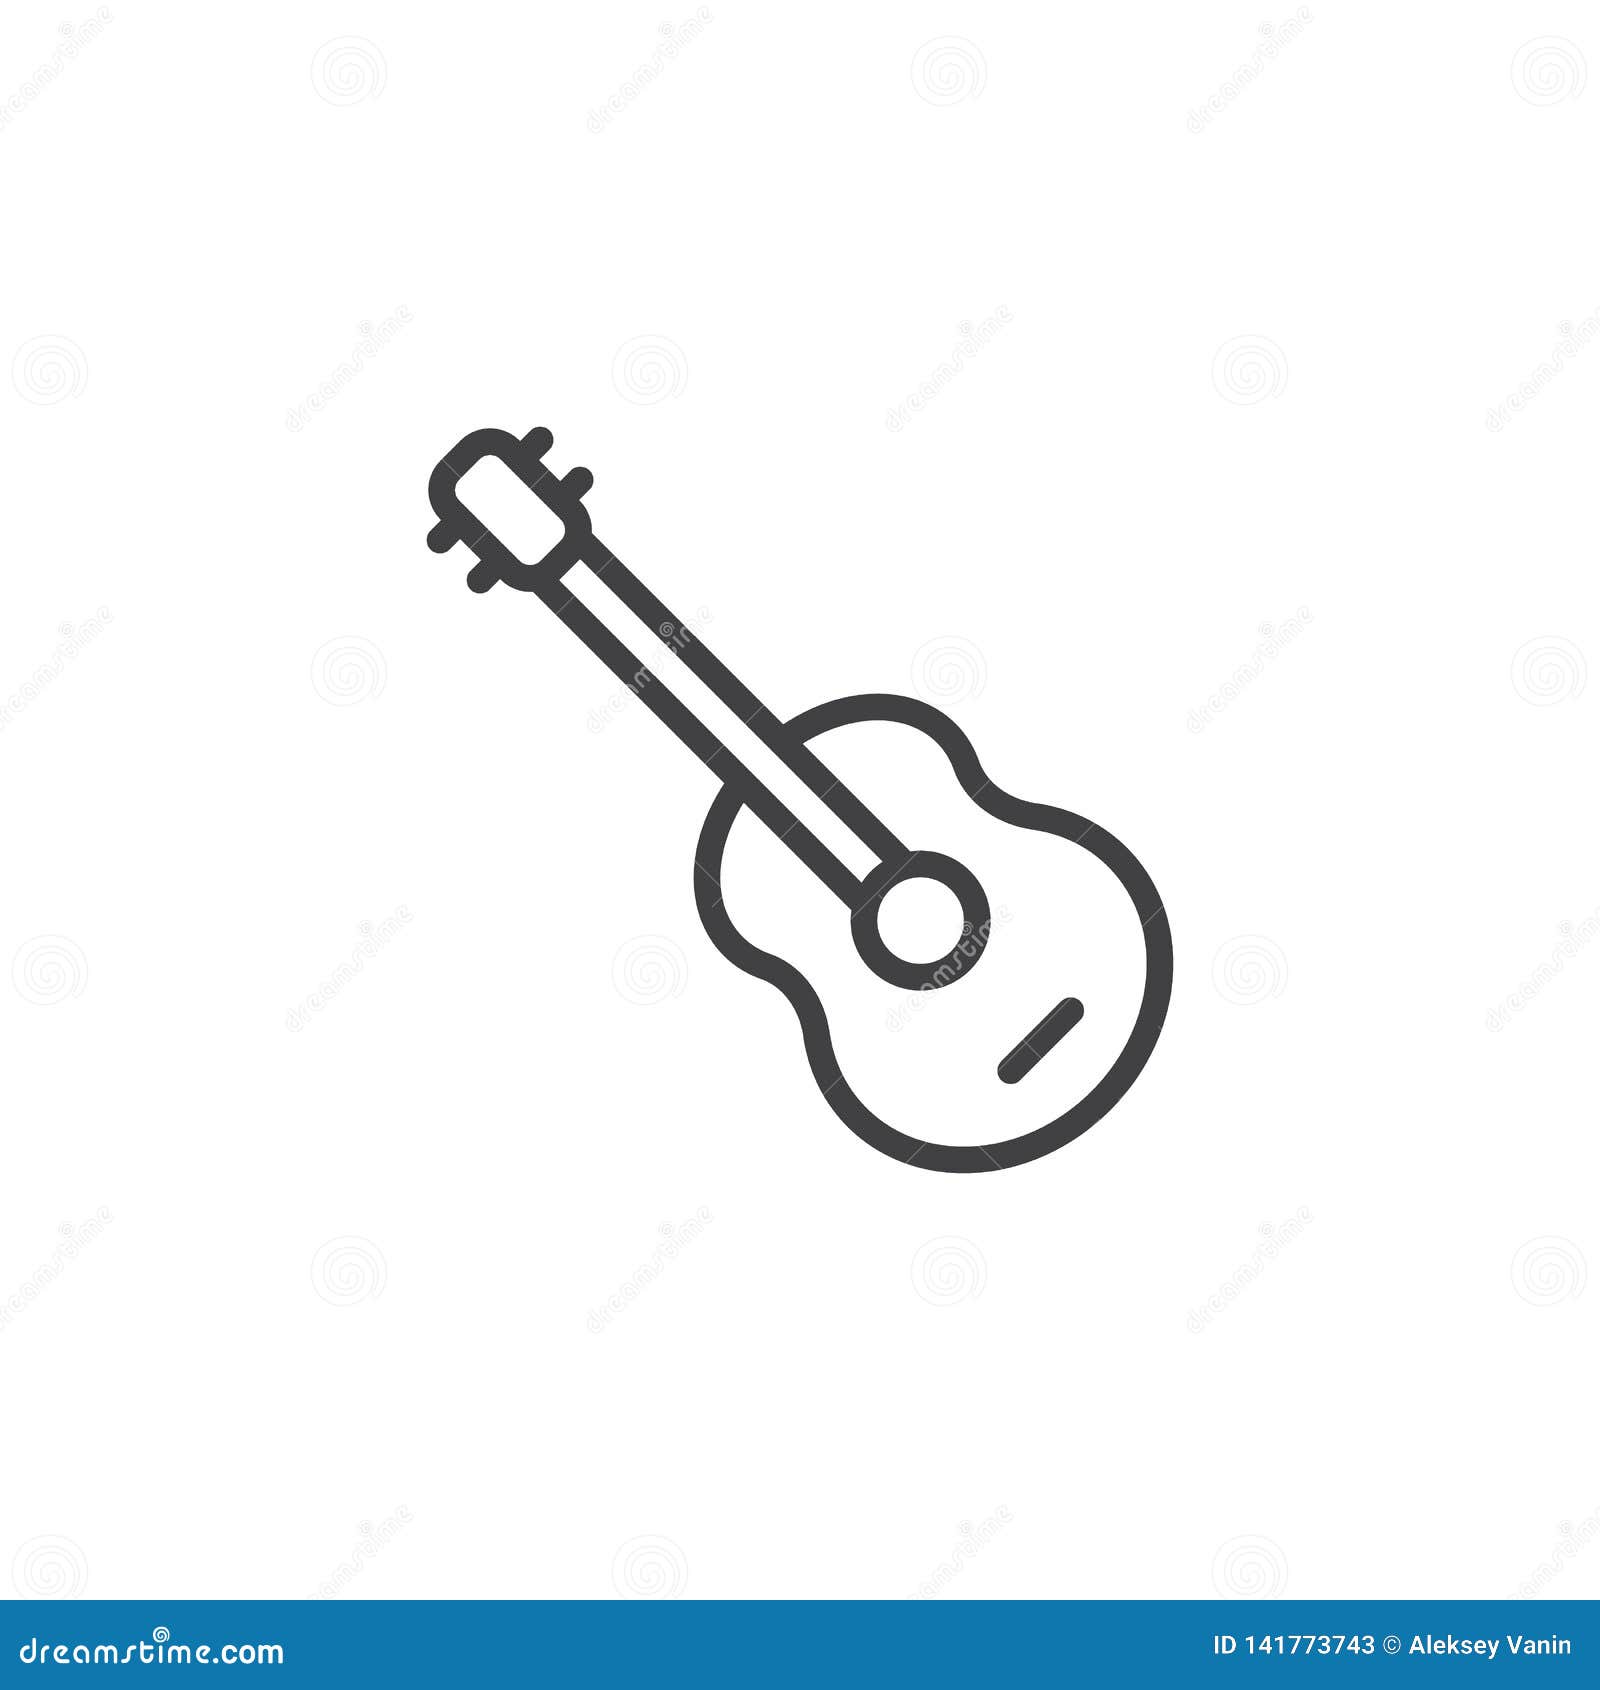 Acoustic guitar line icon stock vector. Illustration of jazz - 141773743